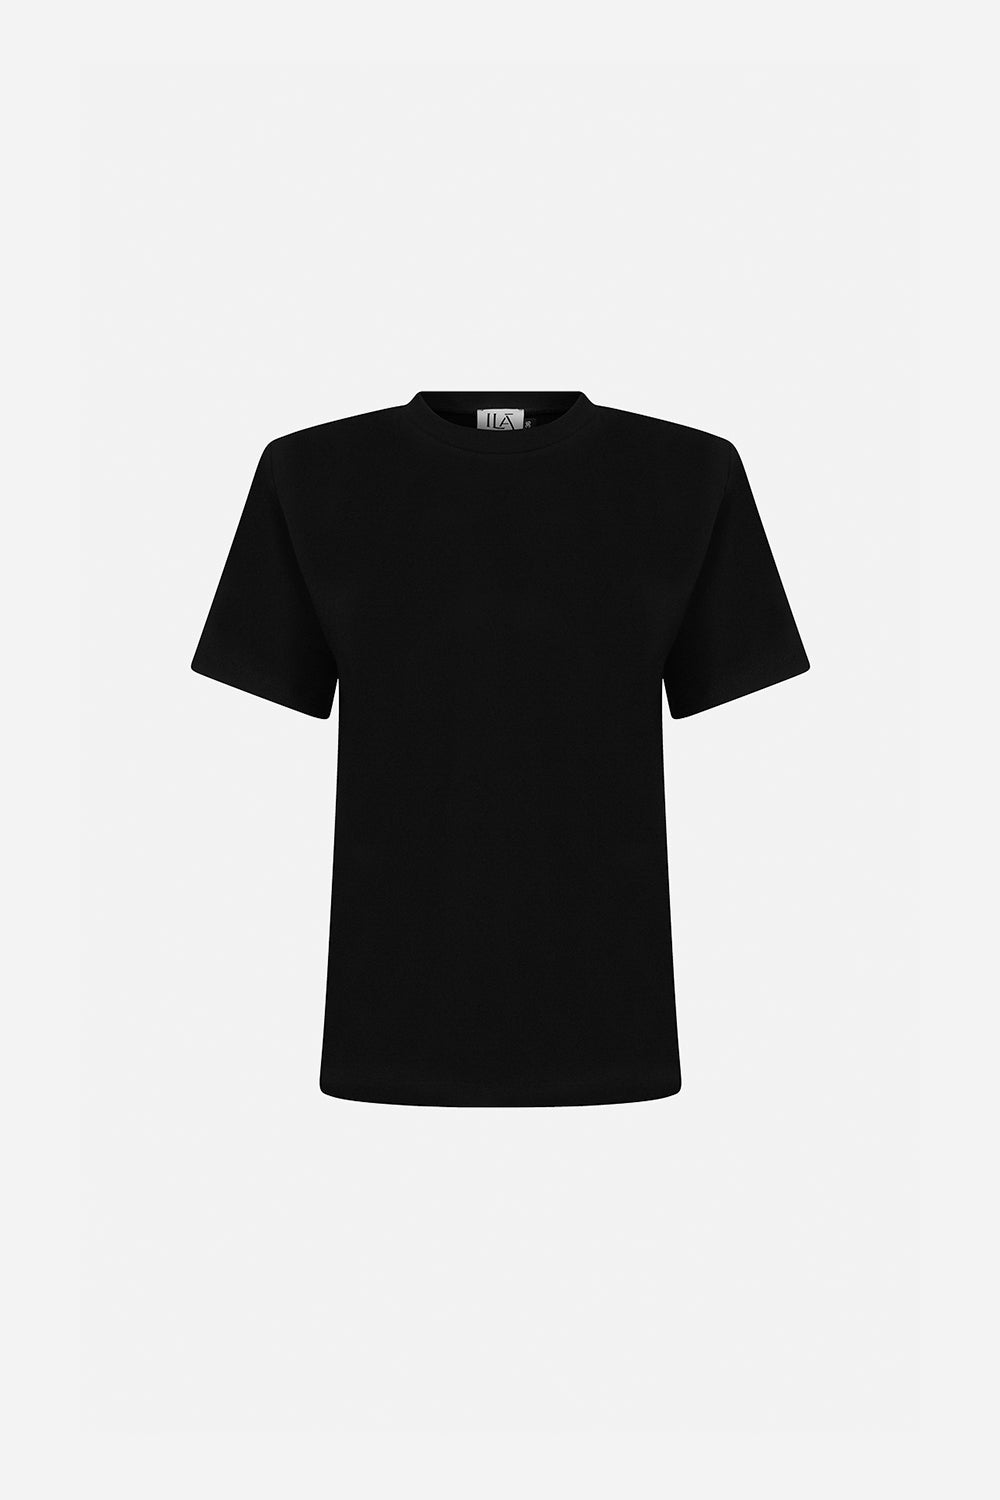 Alicia - Tshirt with shoulder pads in black